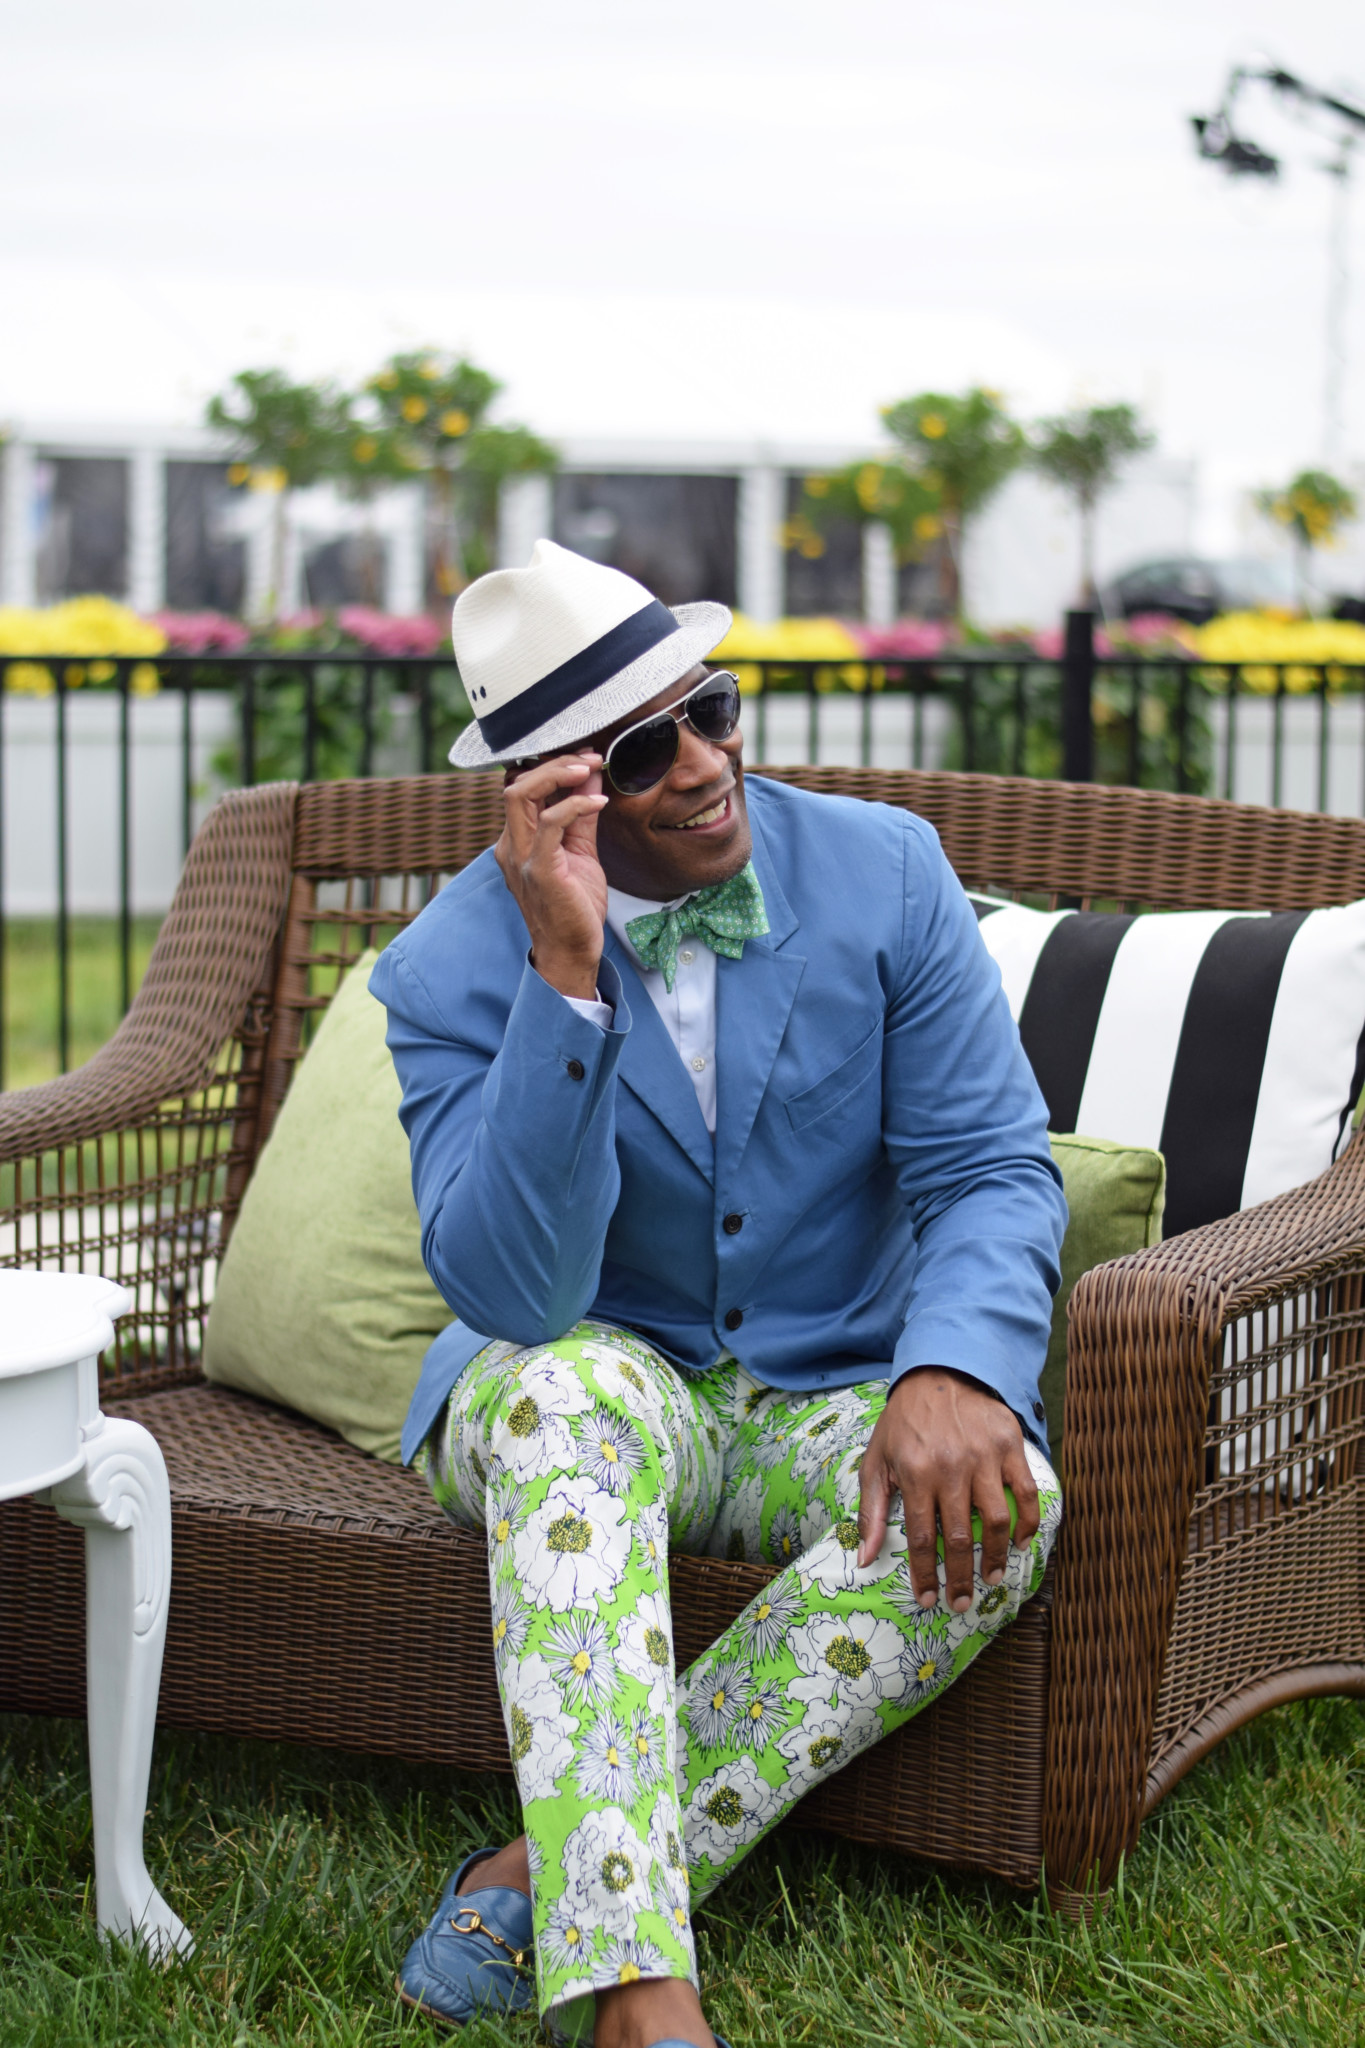 Making a statement at the Preakness - The DCFashion Fool